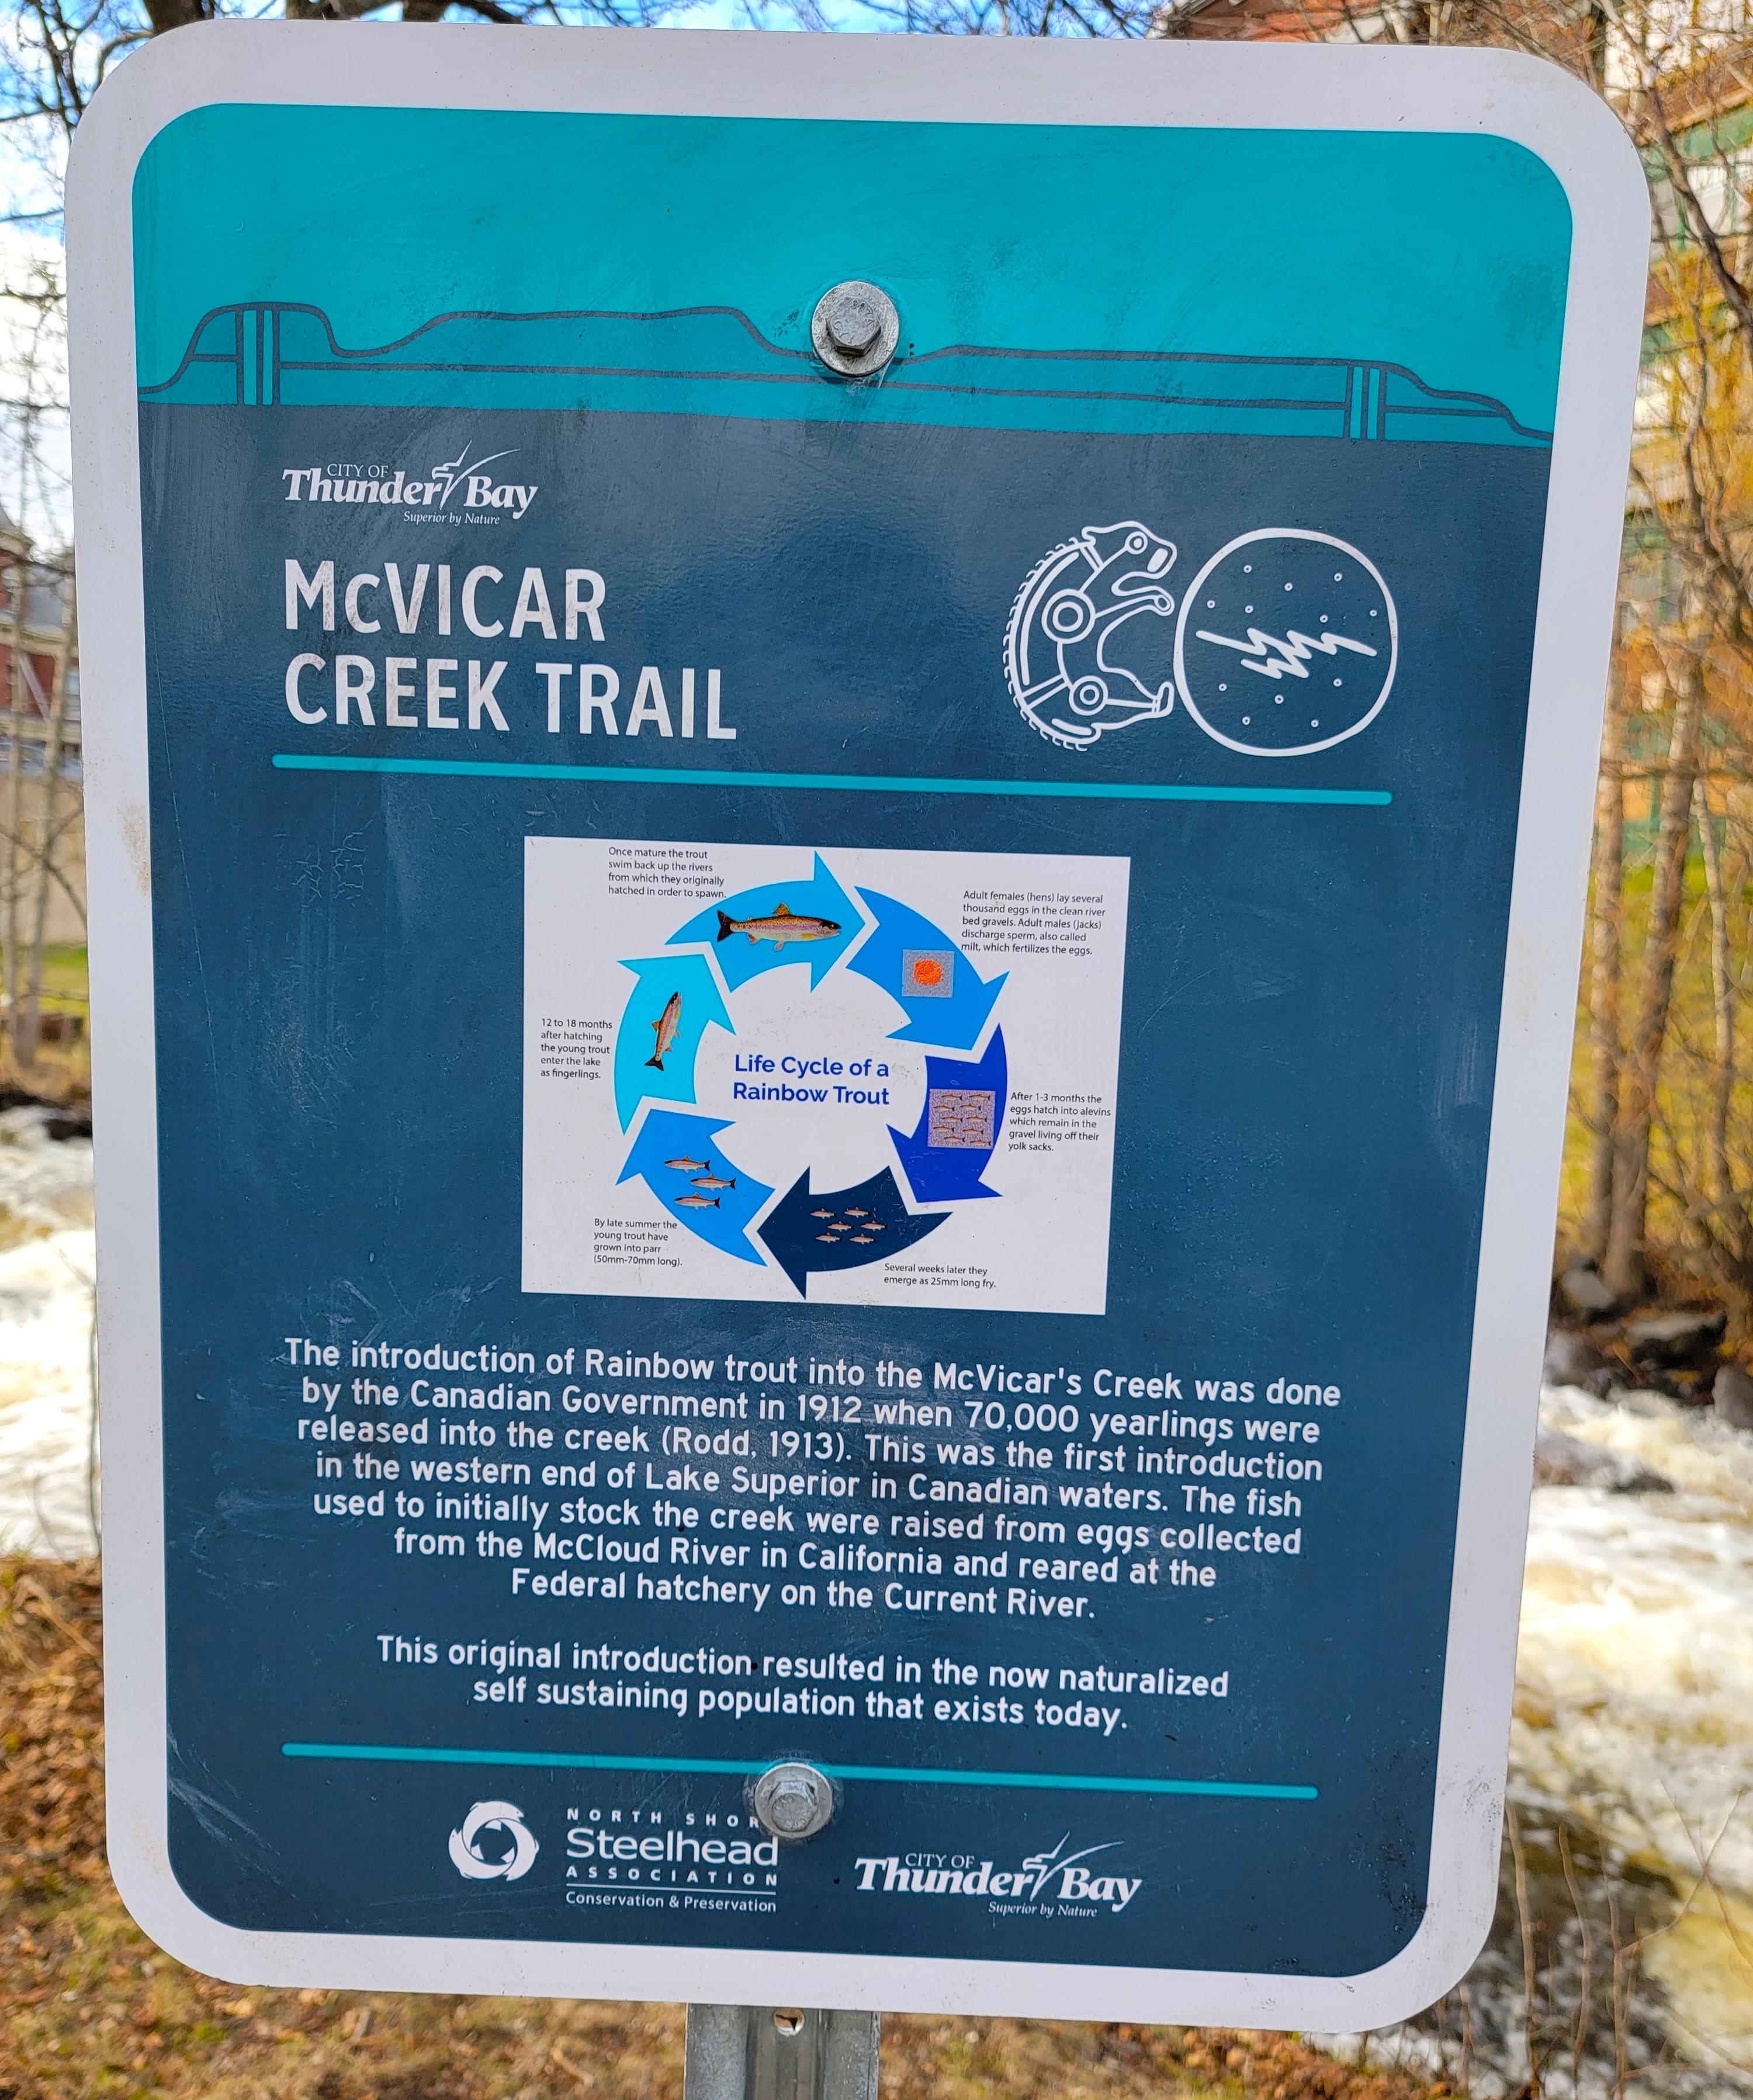 A blue and white sign in a forest that reads "McVicar Creek Trail" and describes the introduction of Rainbow trout into the McVicar's Creek by the Canadian Government in 1912.